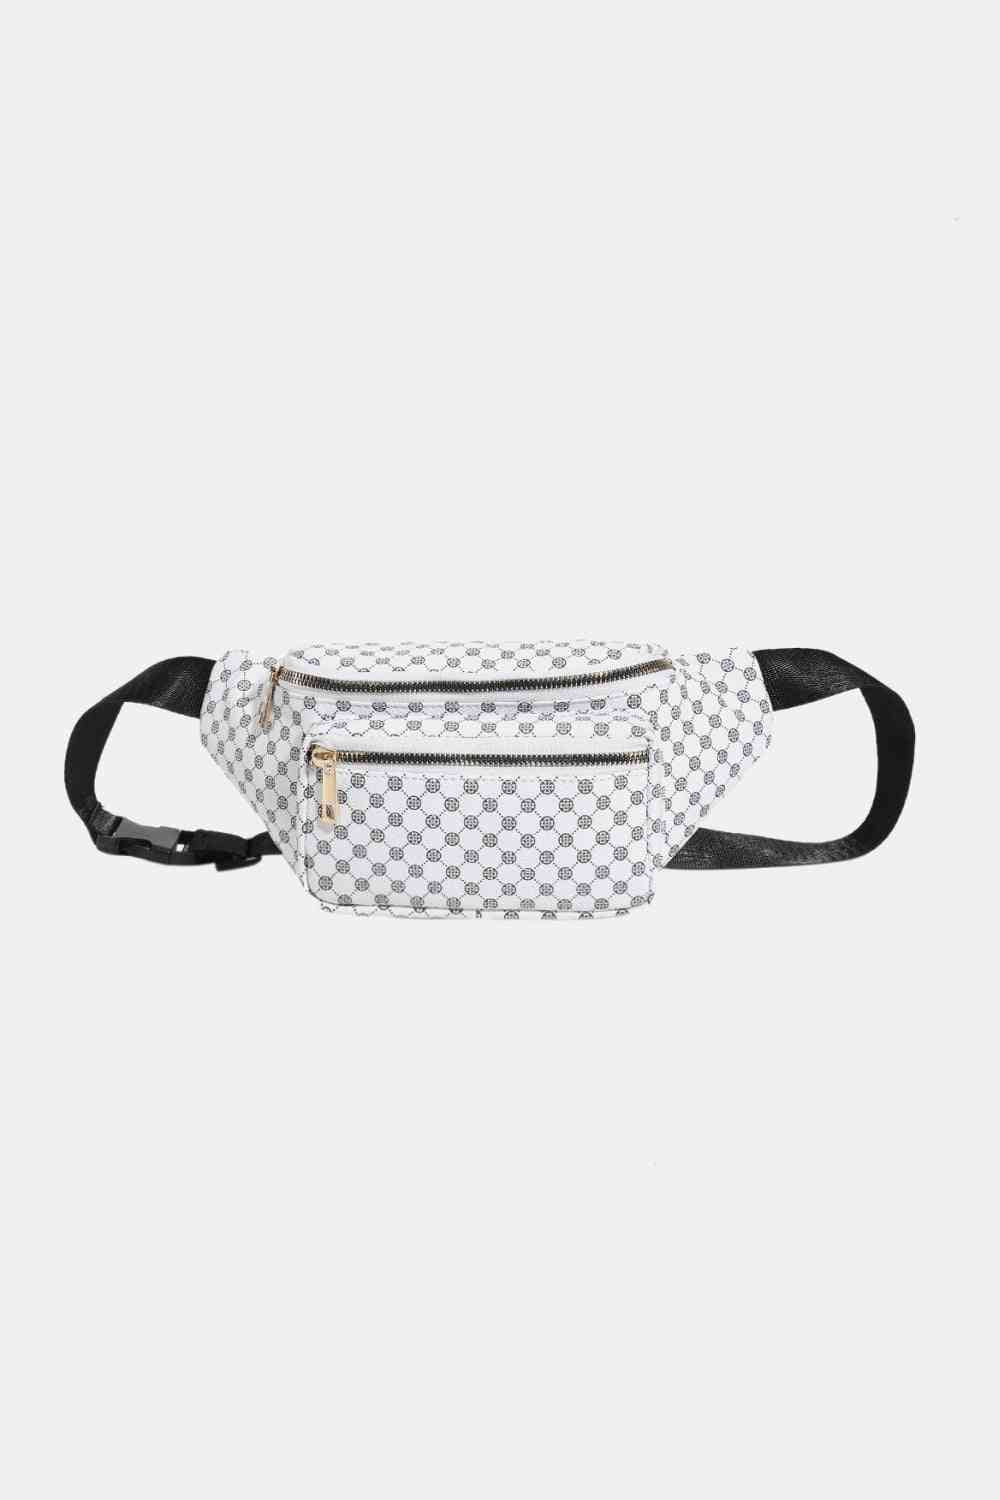 Cupid Beauty Supplies Cupid Beauty Supplies White / One Size Women Sling Bag Small Printed PU Leather Sling Bag - Trendy and Compact